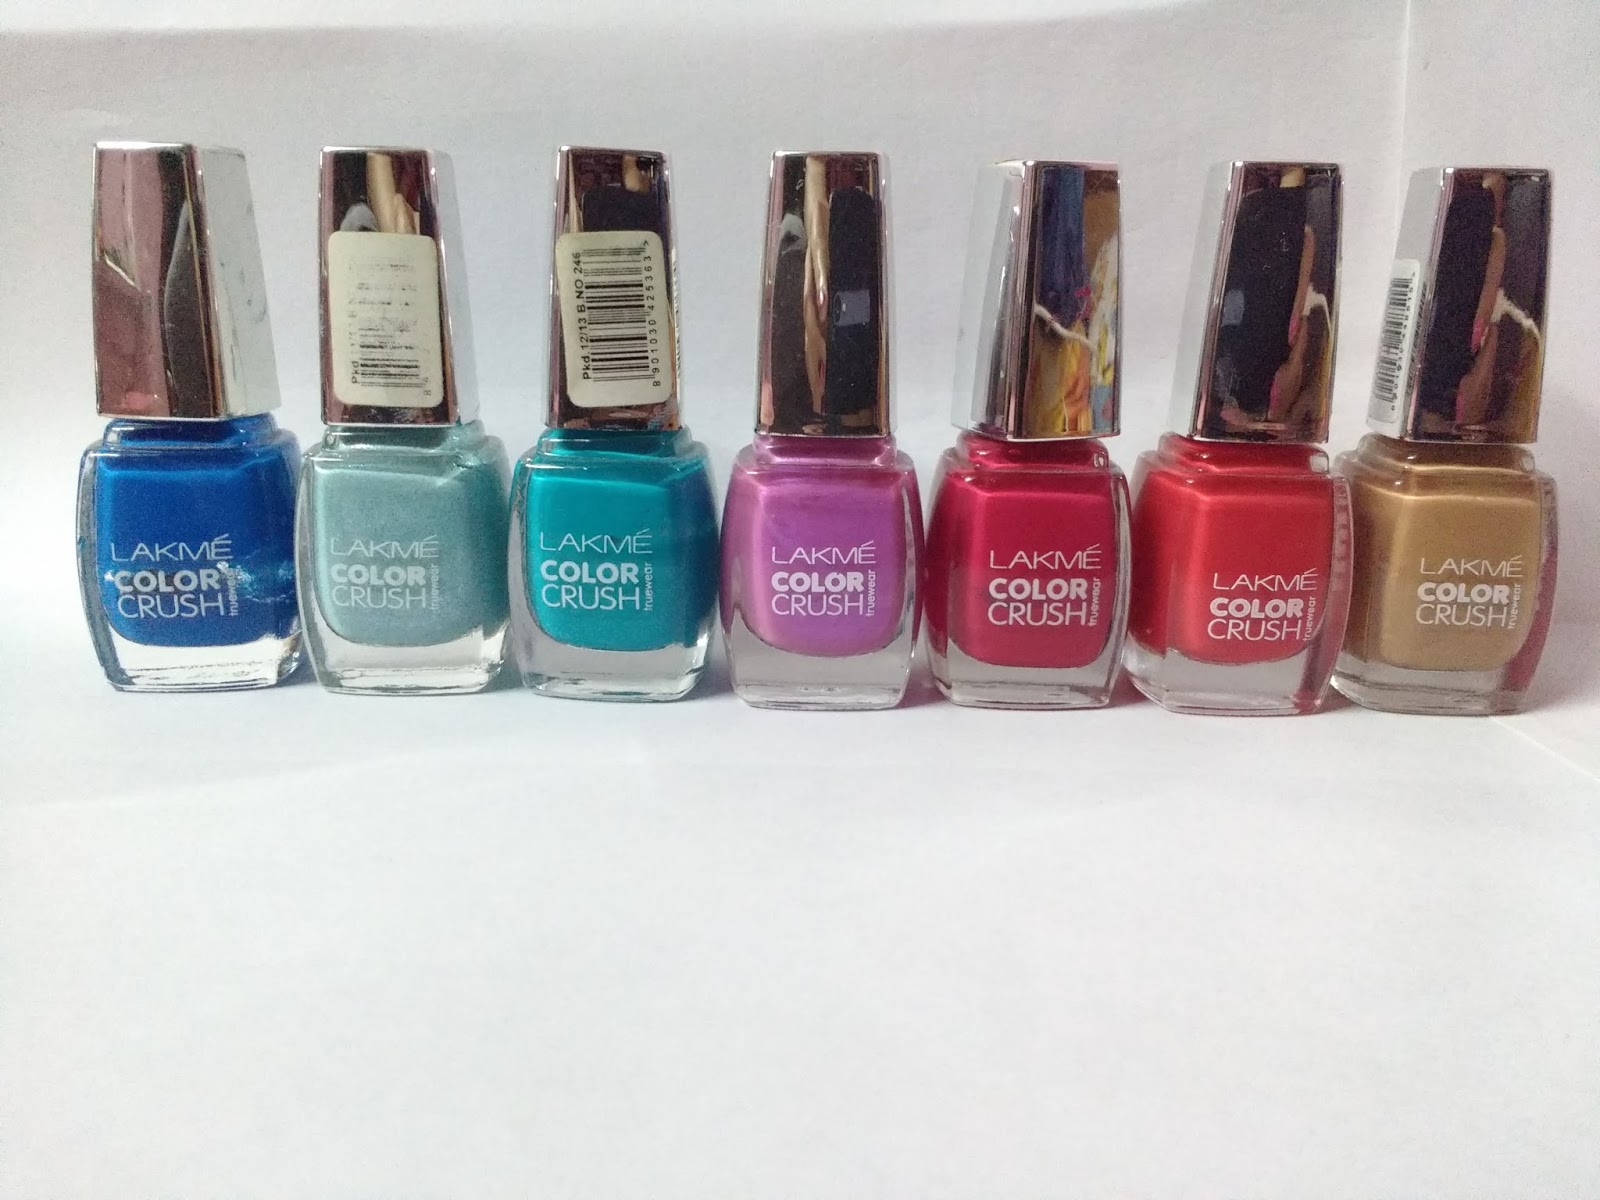 5. A Design Nail Review: The Best Nail Polish Brands for Long-Lasting Designs - wide 8